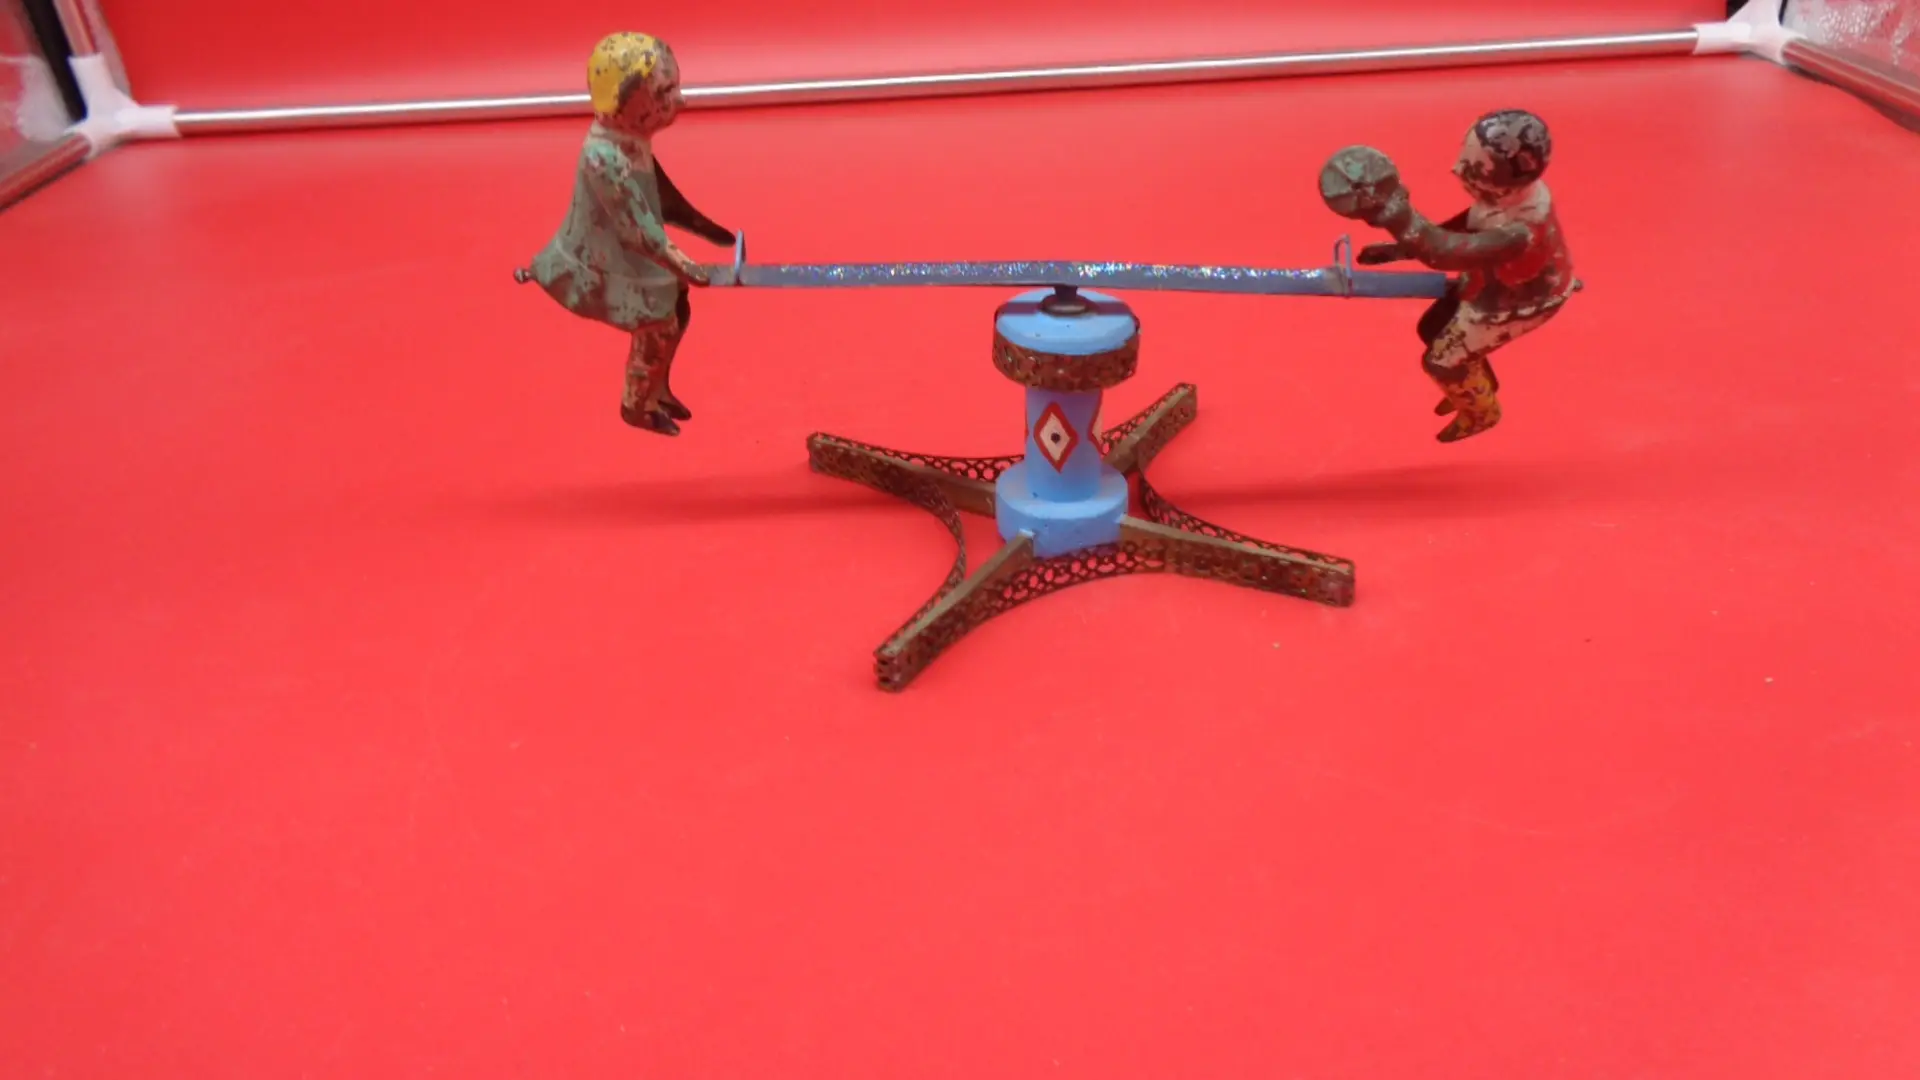 Small, vintage see-saw toy